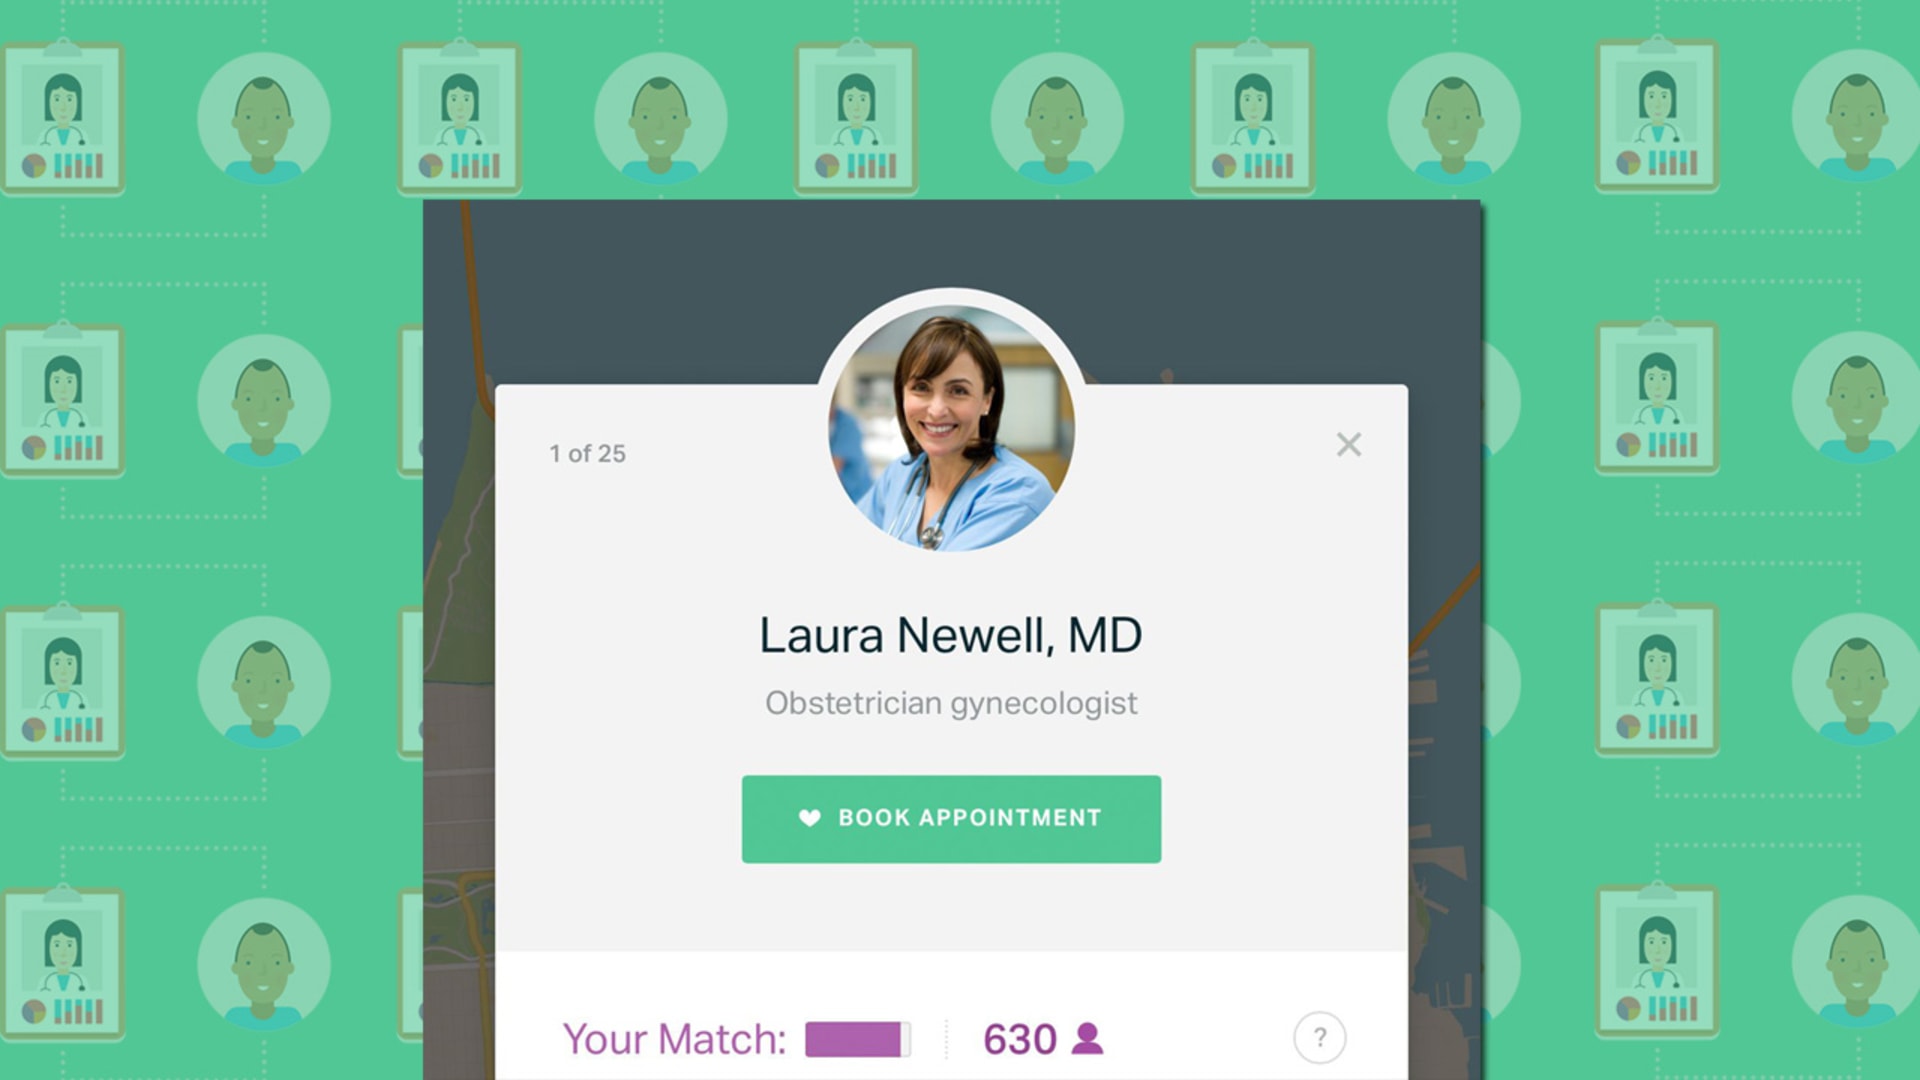 Will Patients Flock To This New “Find A Doctor” App?